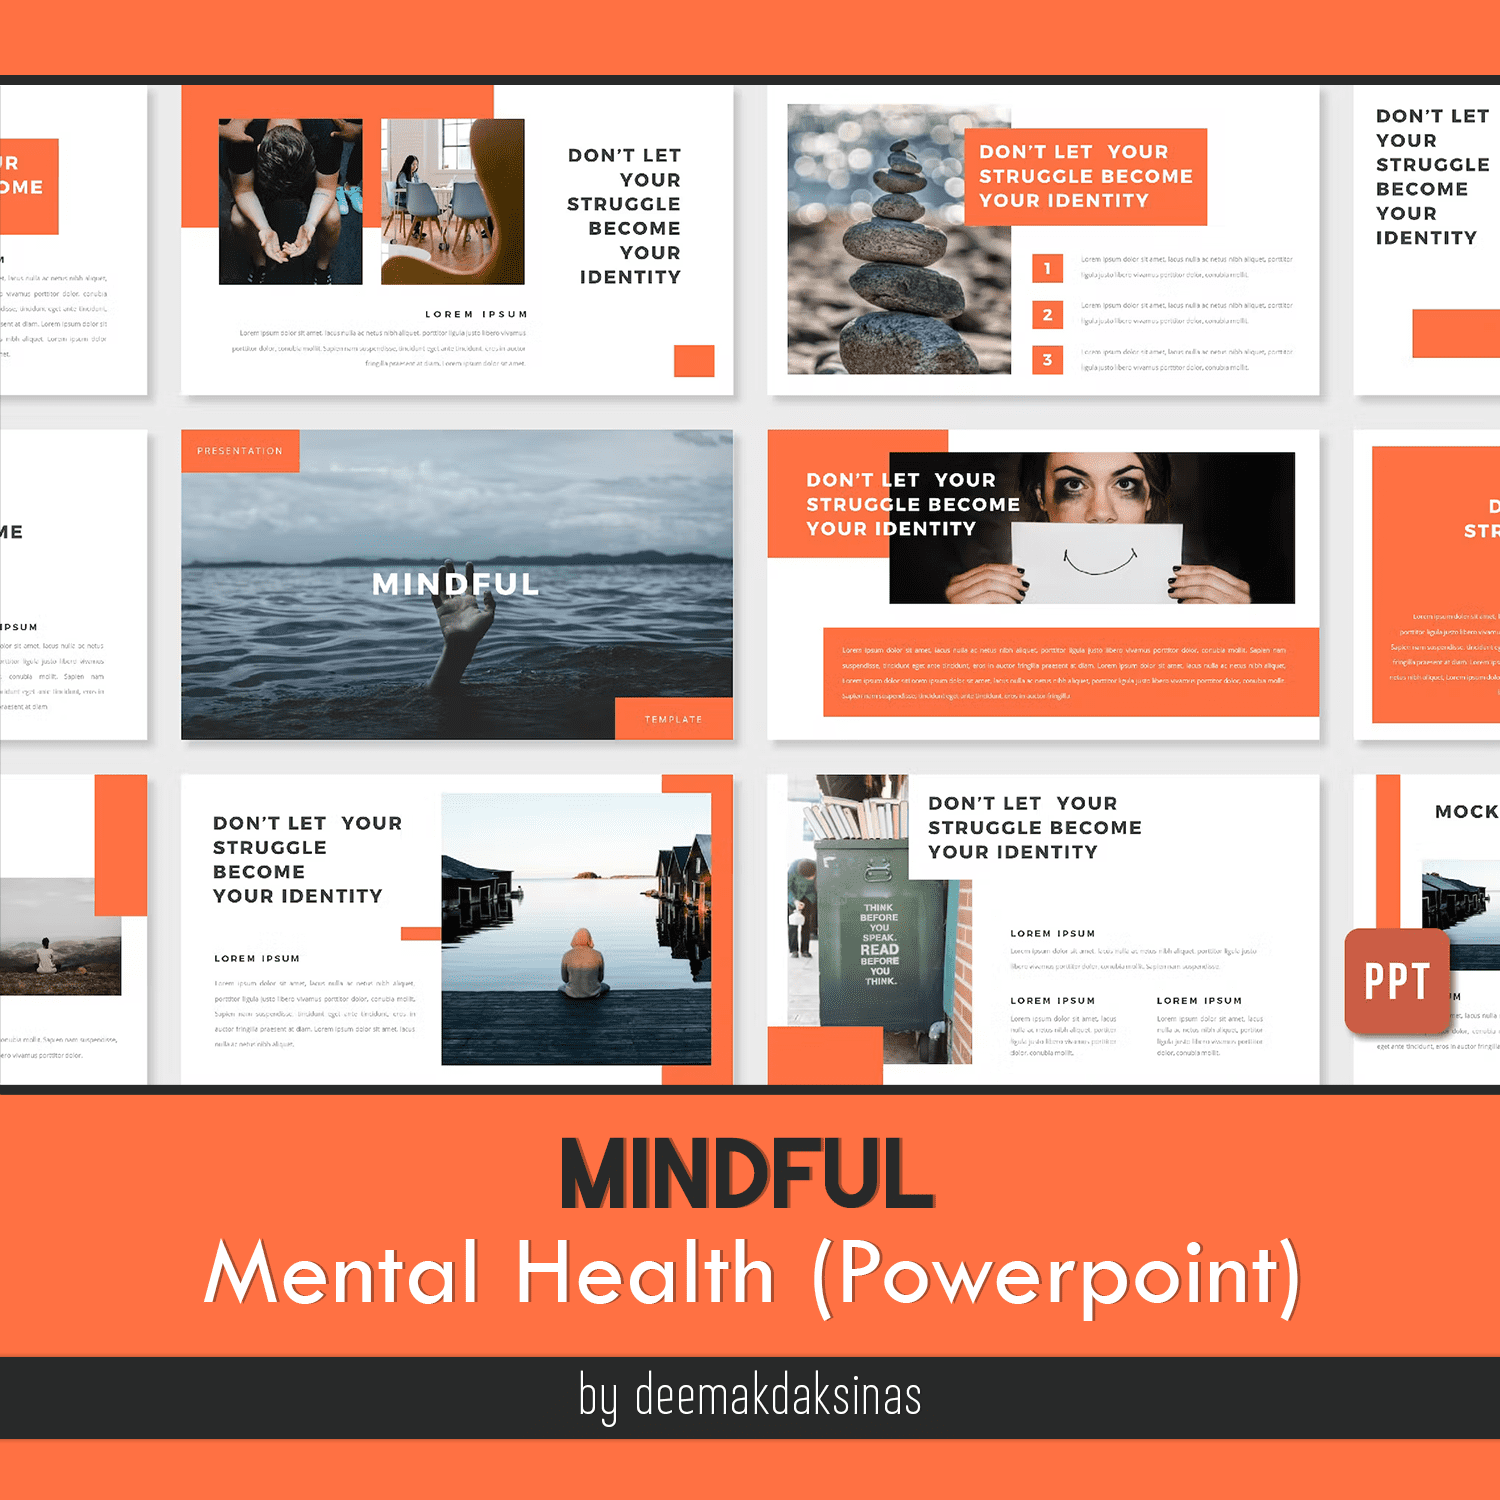 Mindful - Mental Health (Powerpoint) Cover.